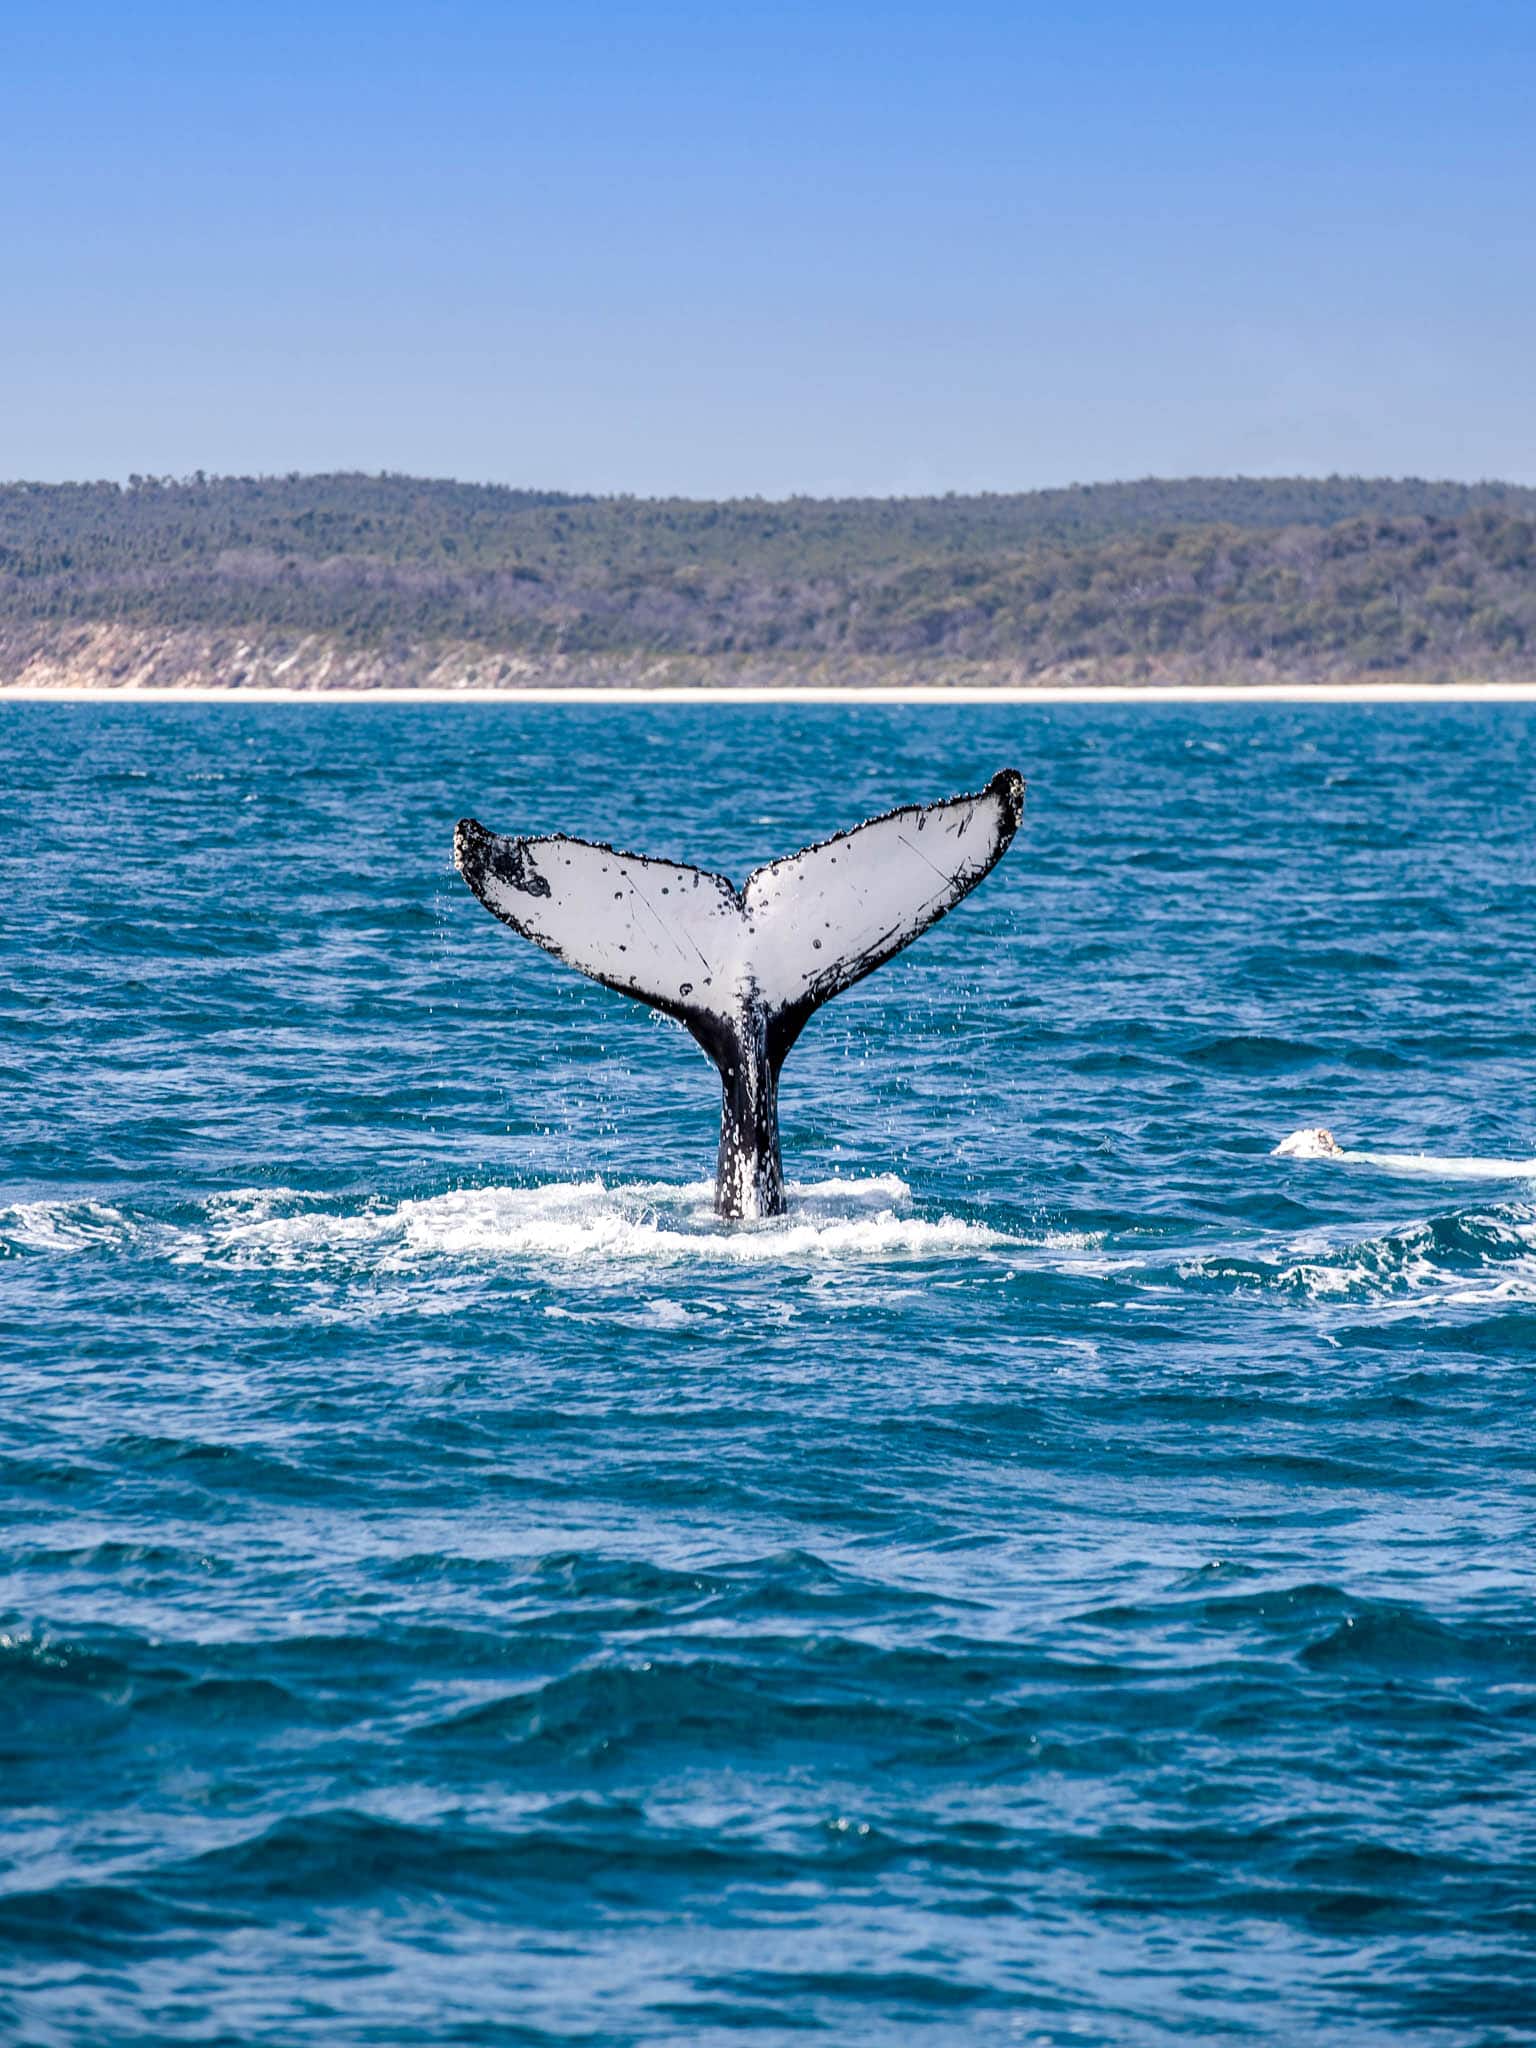 Whale watching cruise to Platypus Bay and Great Sandy Straits Marine Park